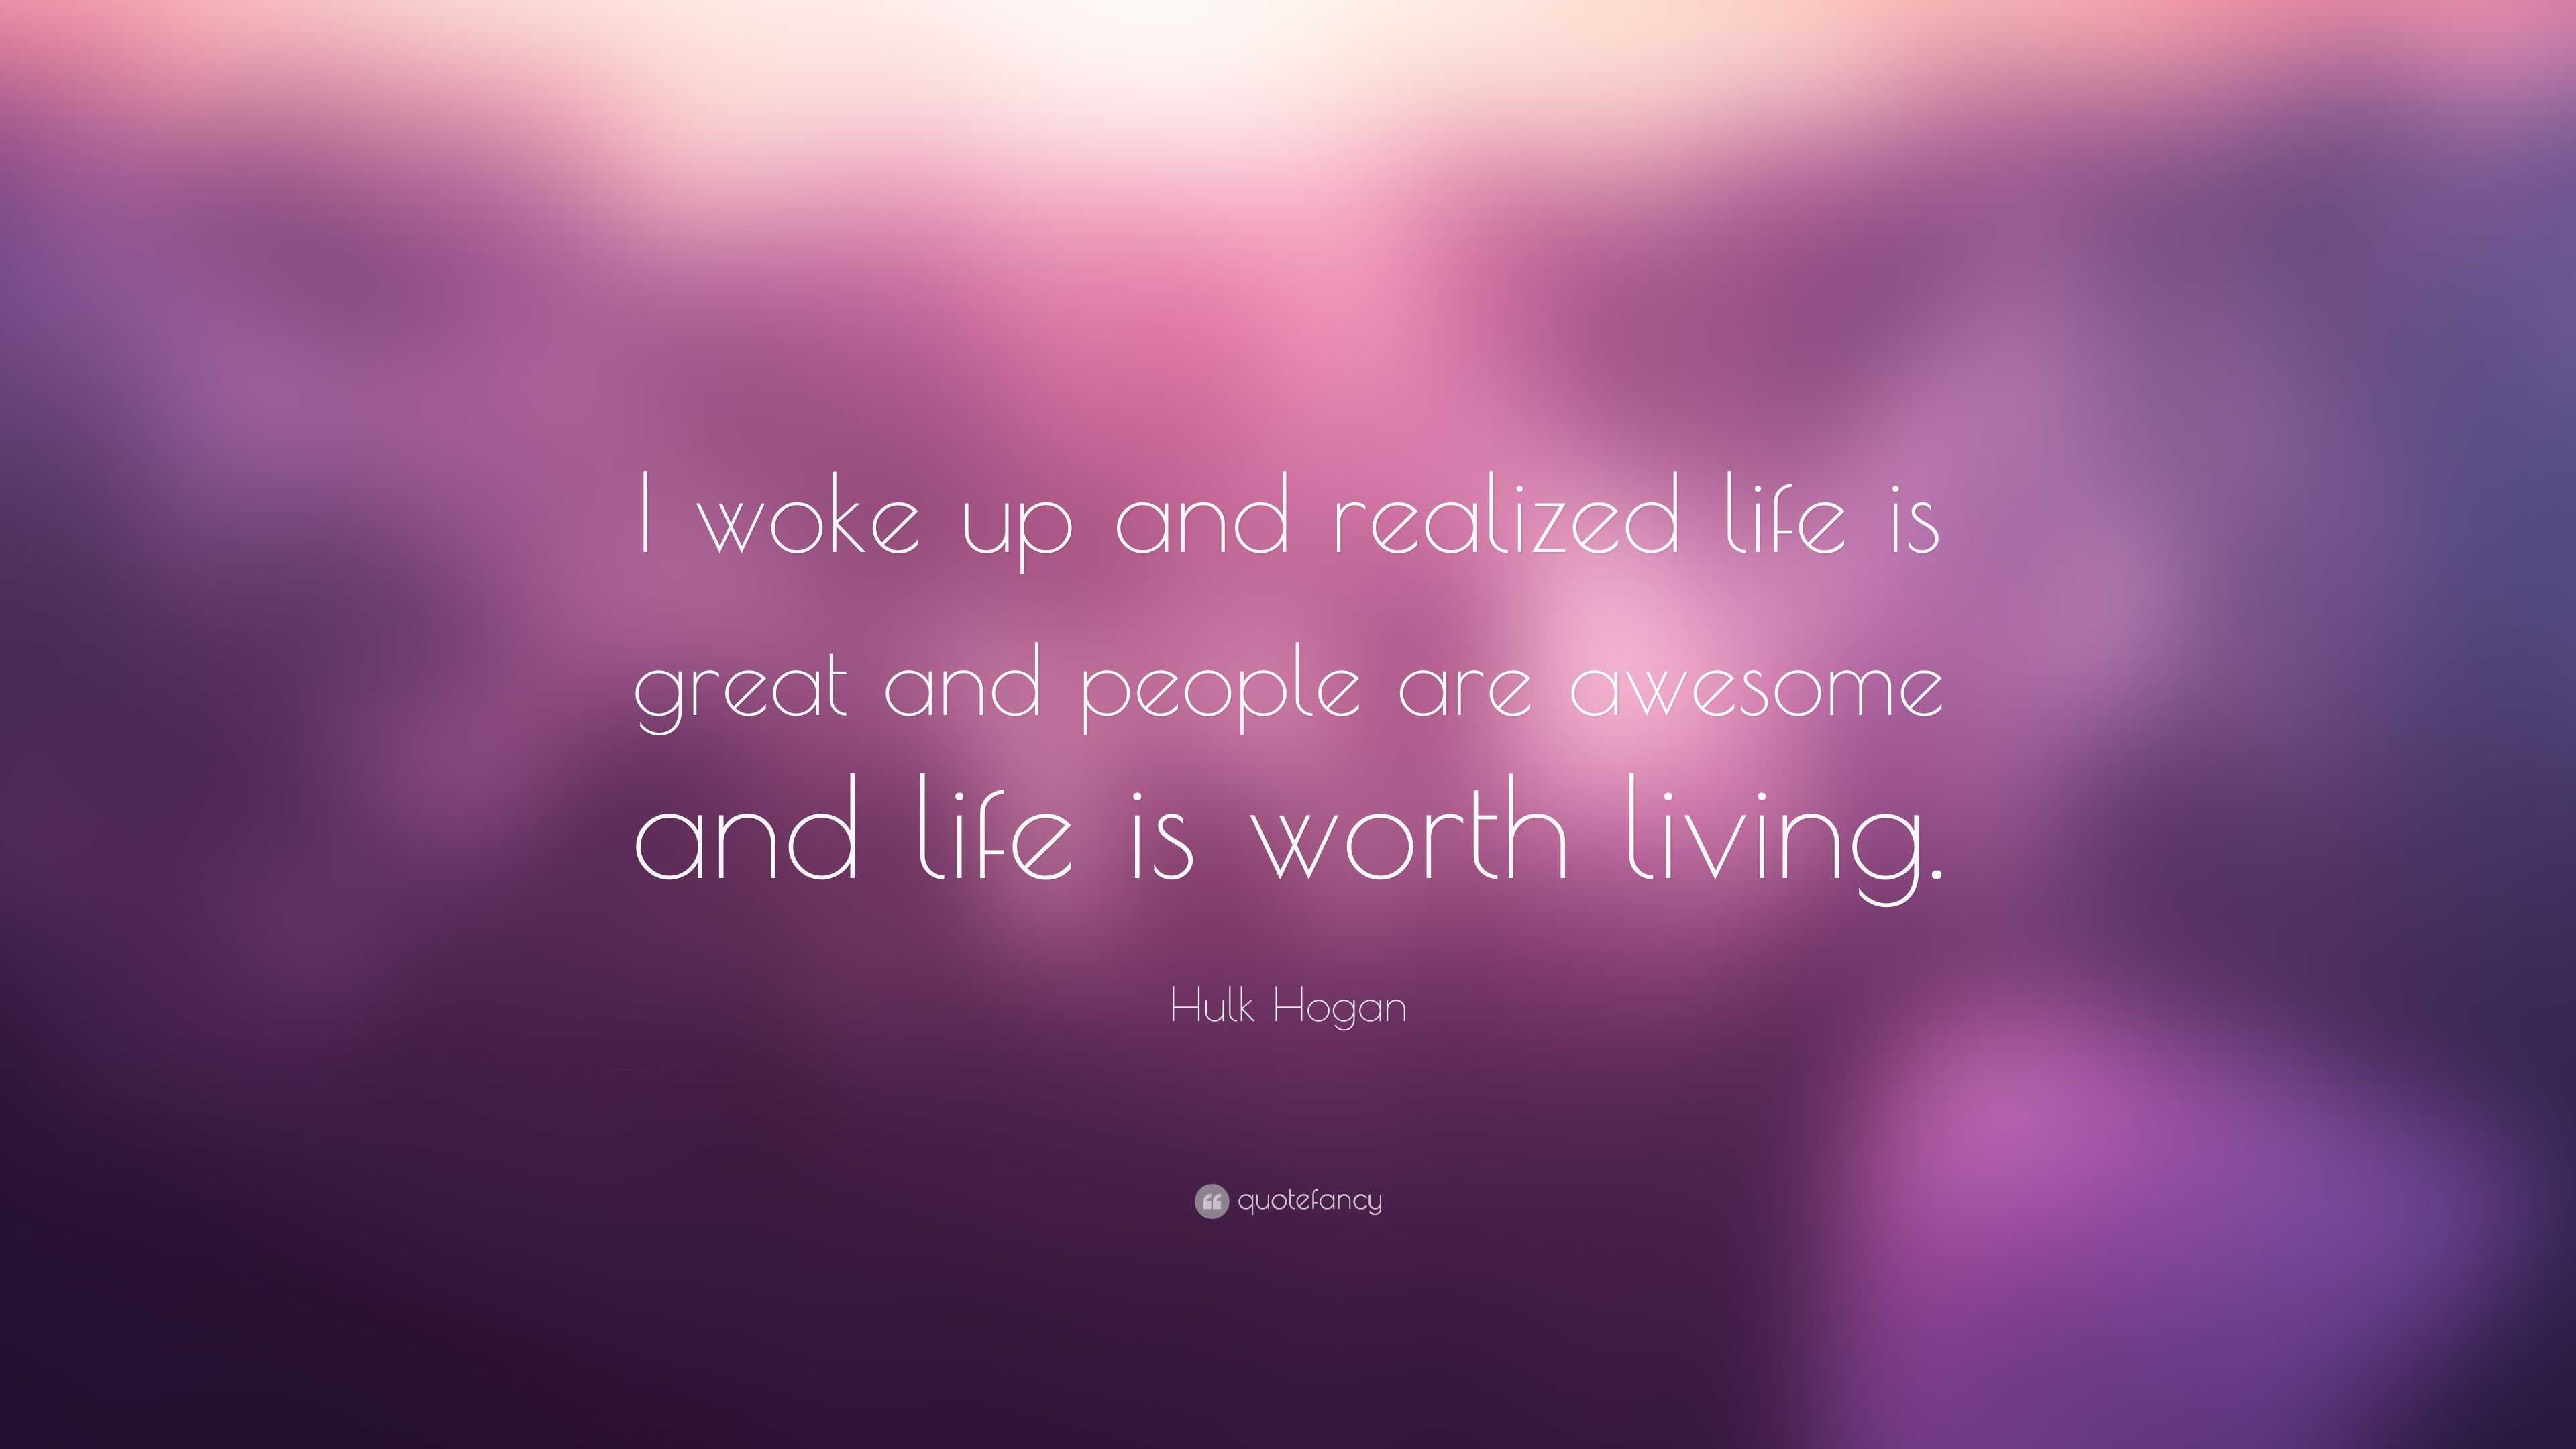 Hulk Hogan Quote: “I woke up and realized life is great and people are ...